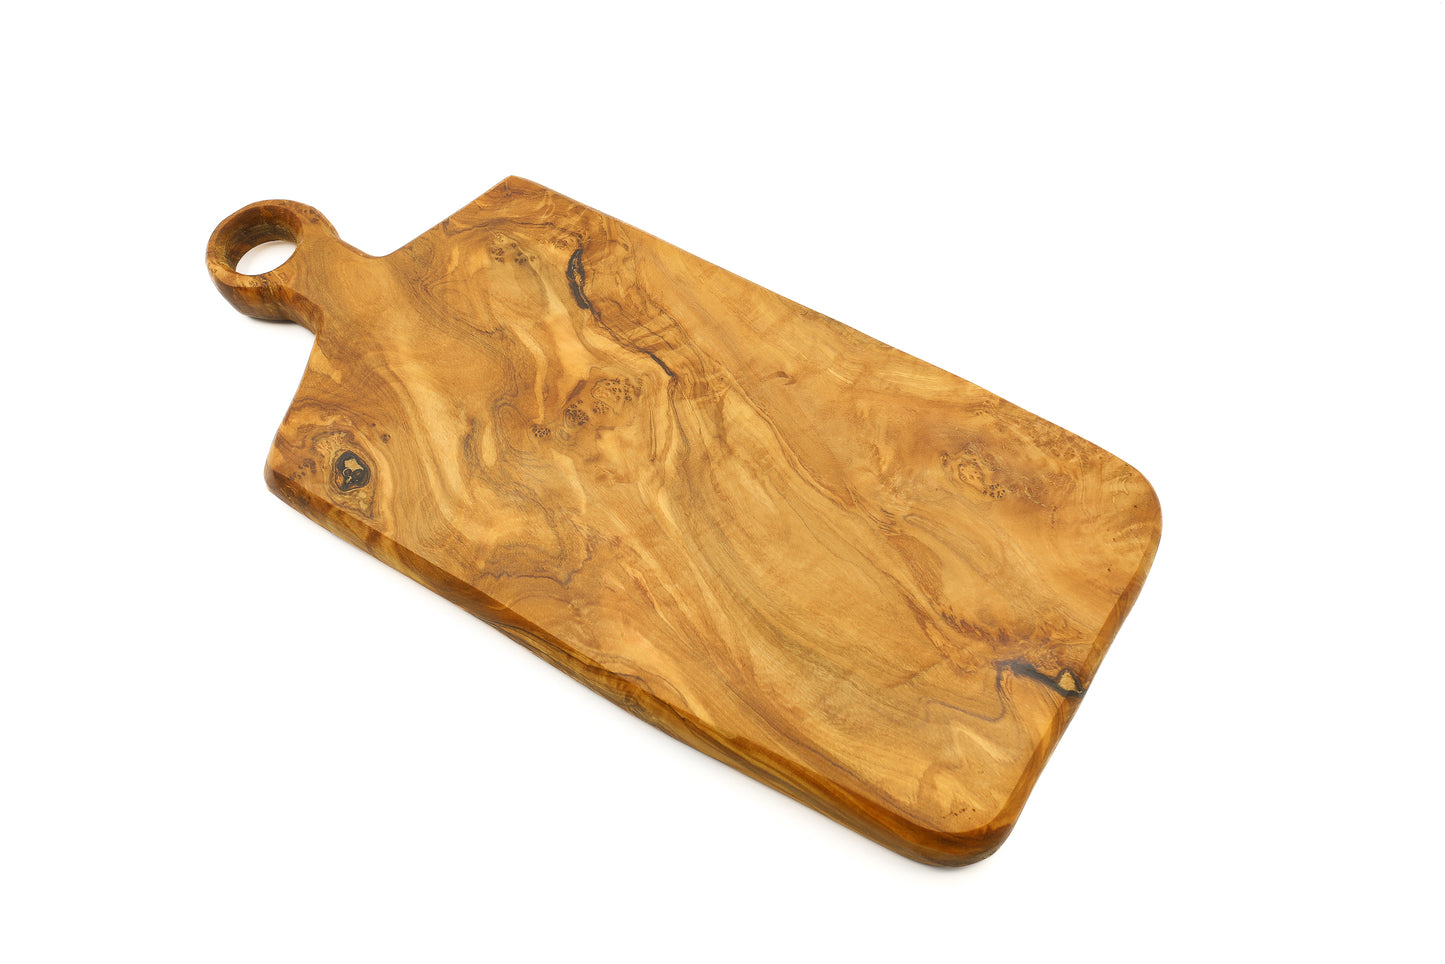 Rectangular olive wood cutting board featuring a ringed handle